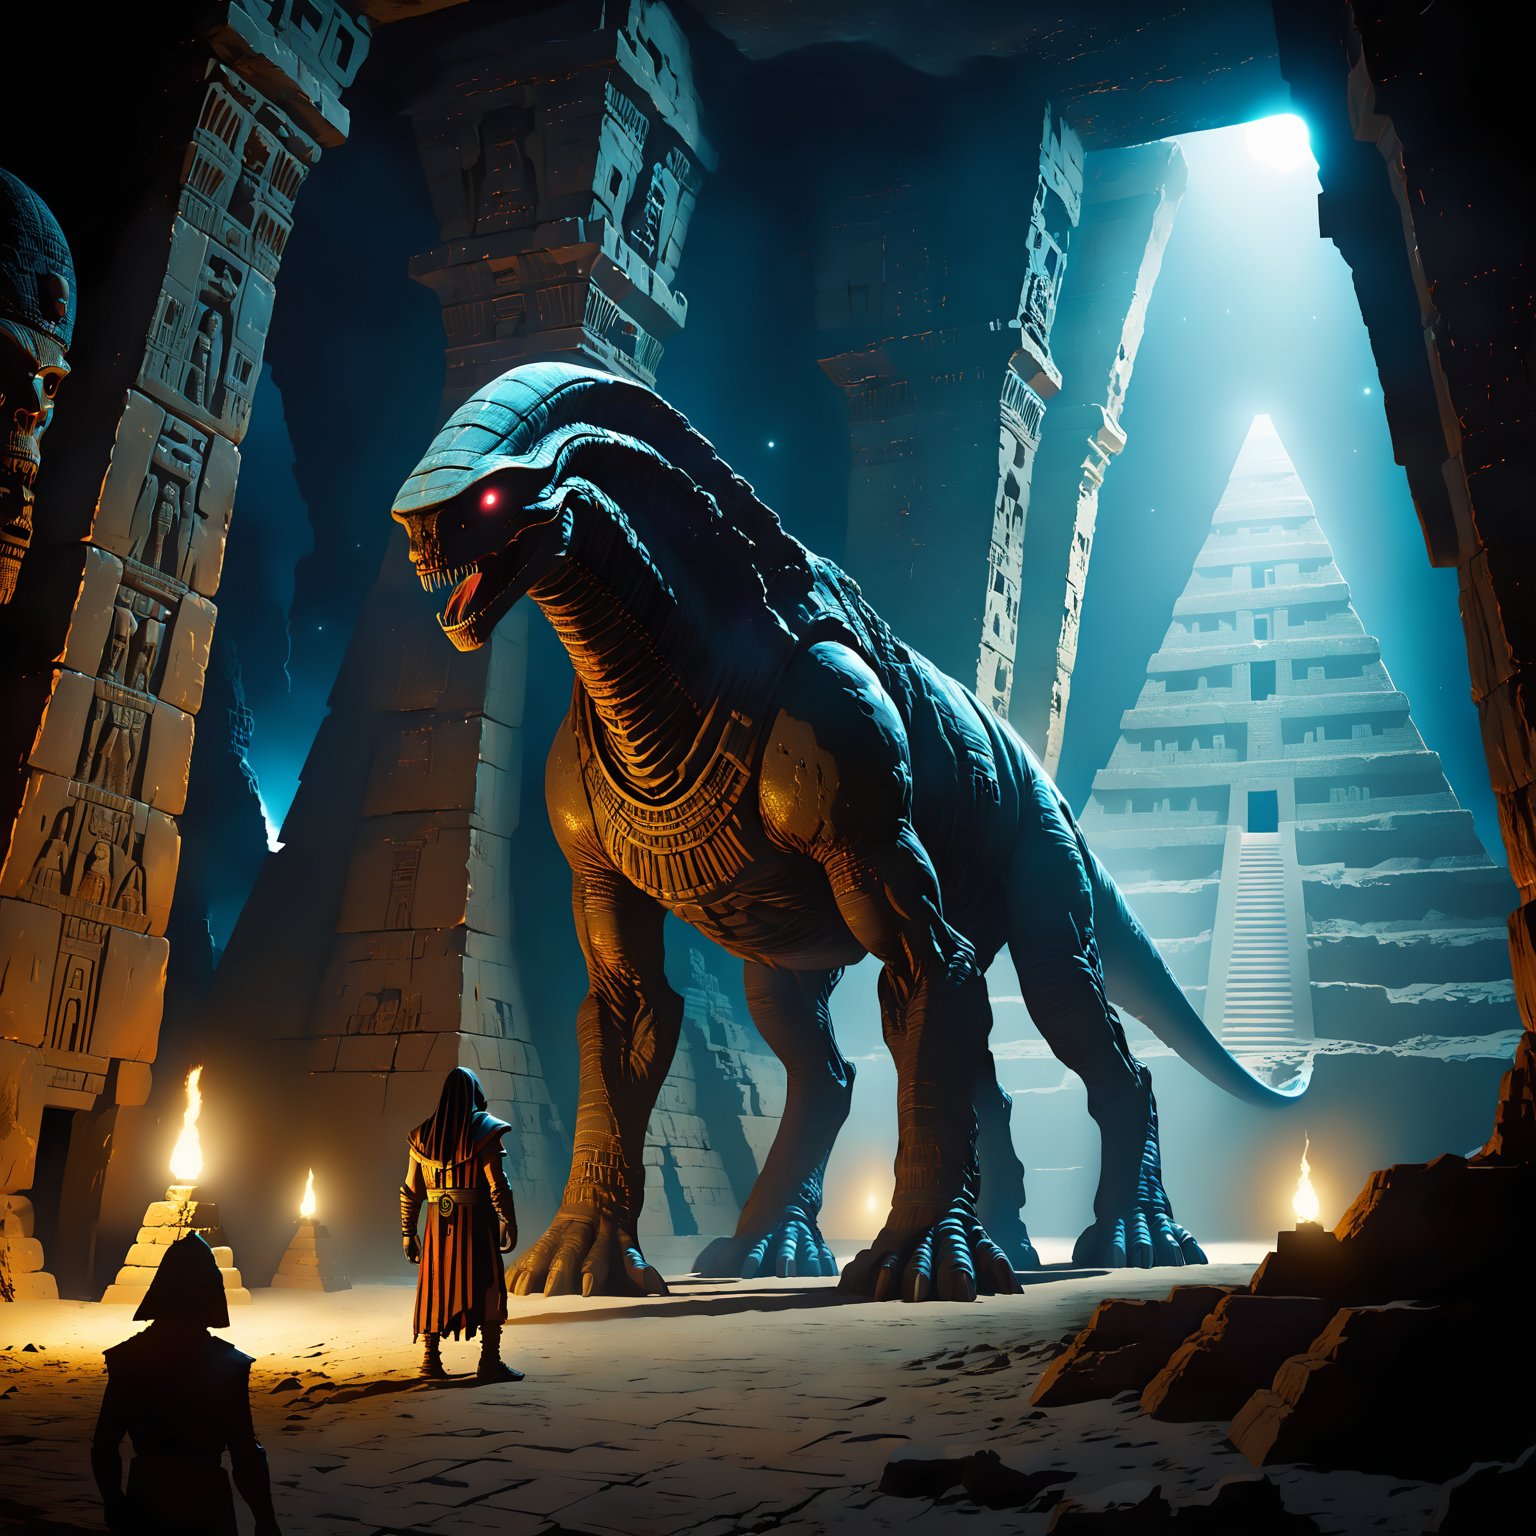 cinematic film still nodf_xl, high quality, Ancient alien creature, giant, huge, standing, inside Ancient pyramid, close up, nighttime, dark, <lora:nodf_xl:1> . shallow depth of field, vignette, highly detailed, high budget, bokeh, cinemascope, moody, epic, gorgeous, film grain, grainy